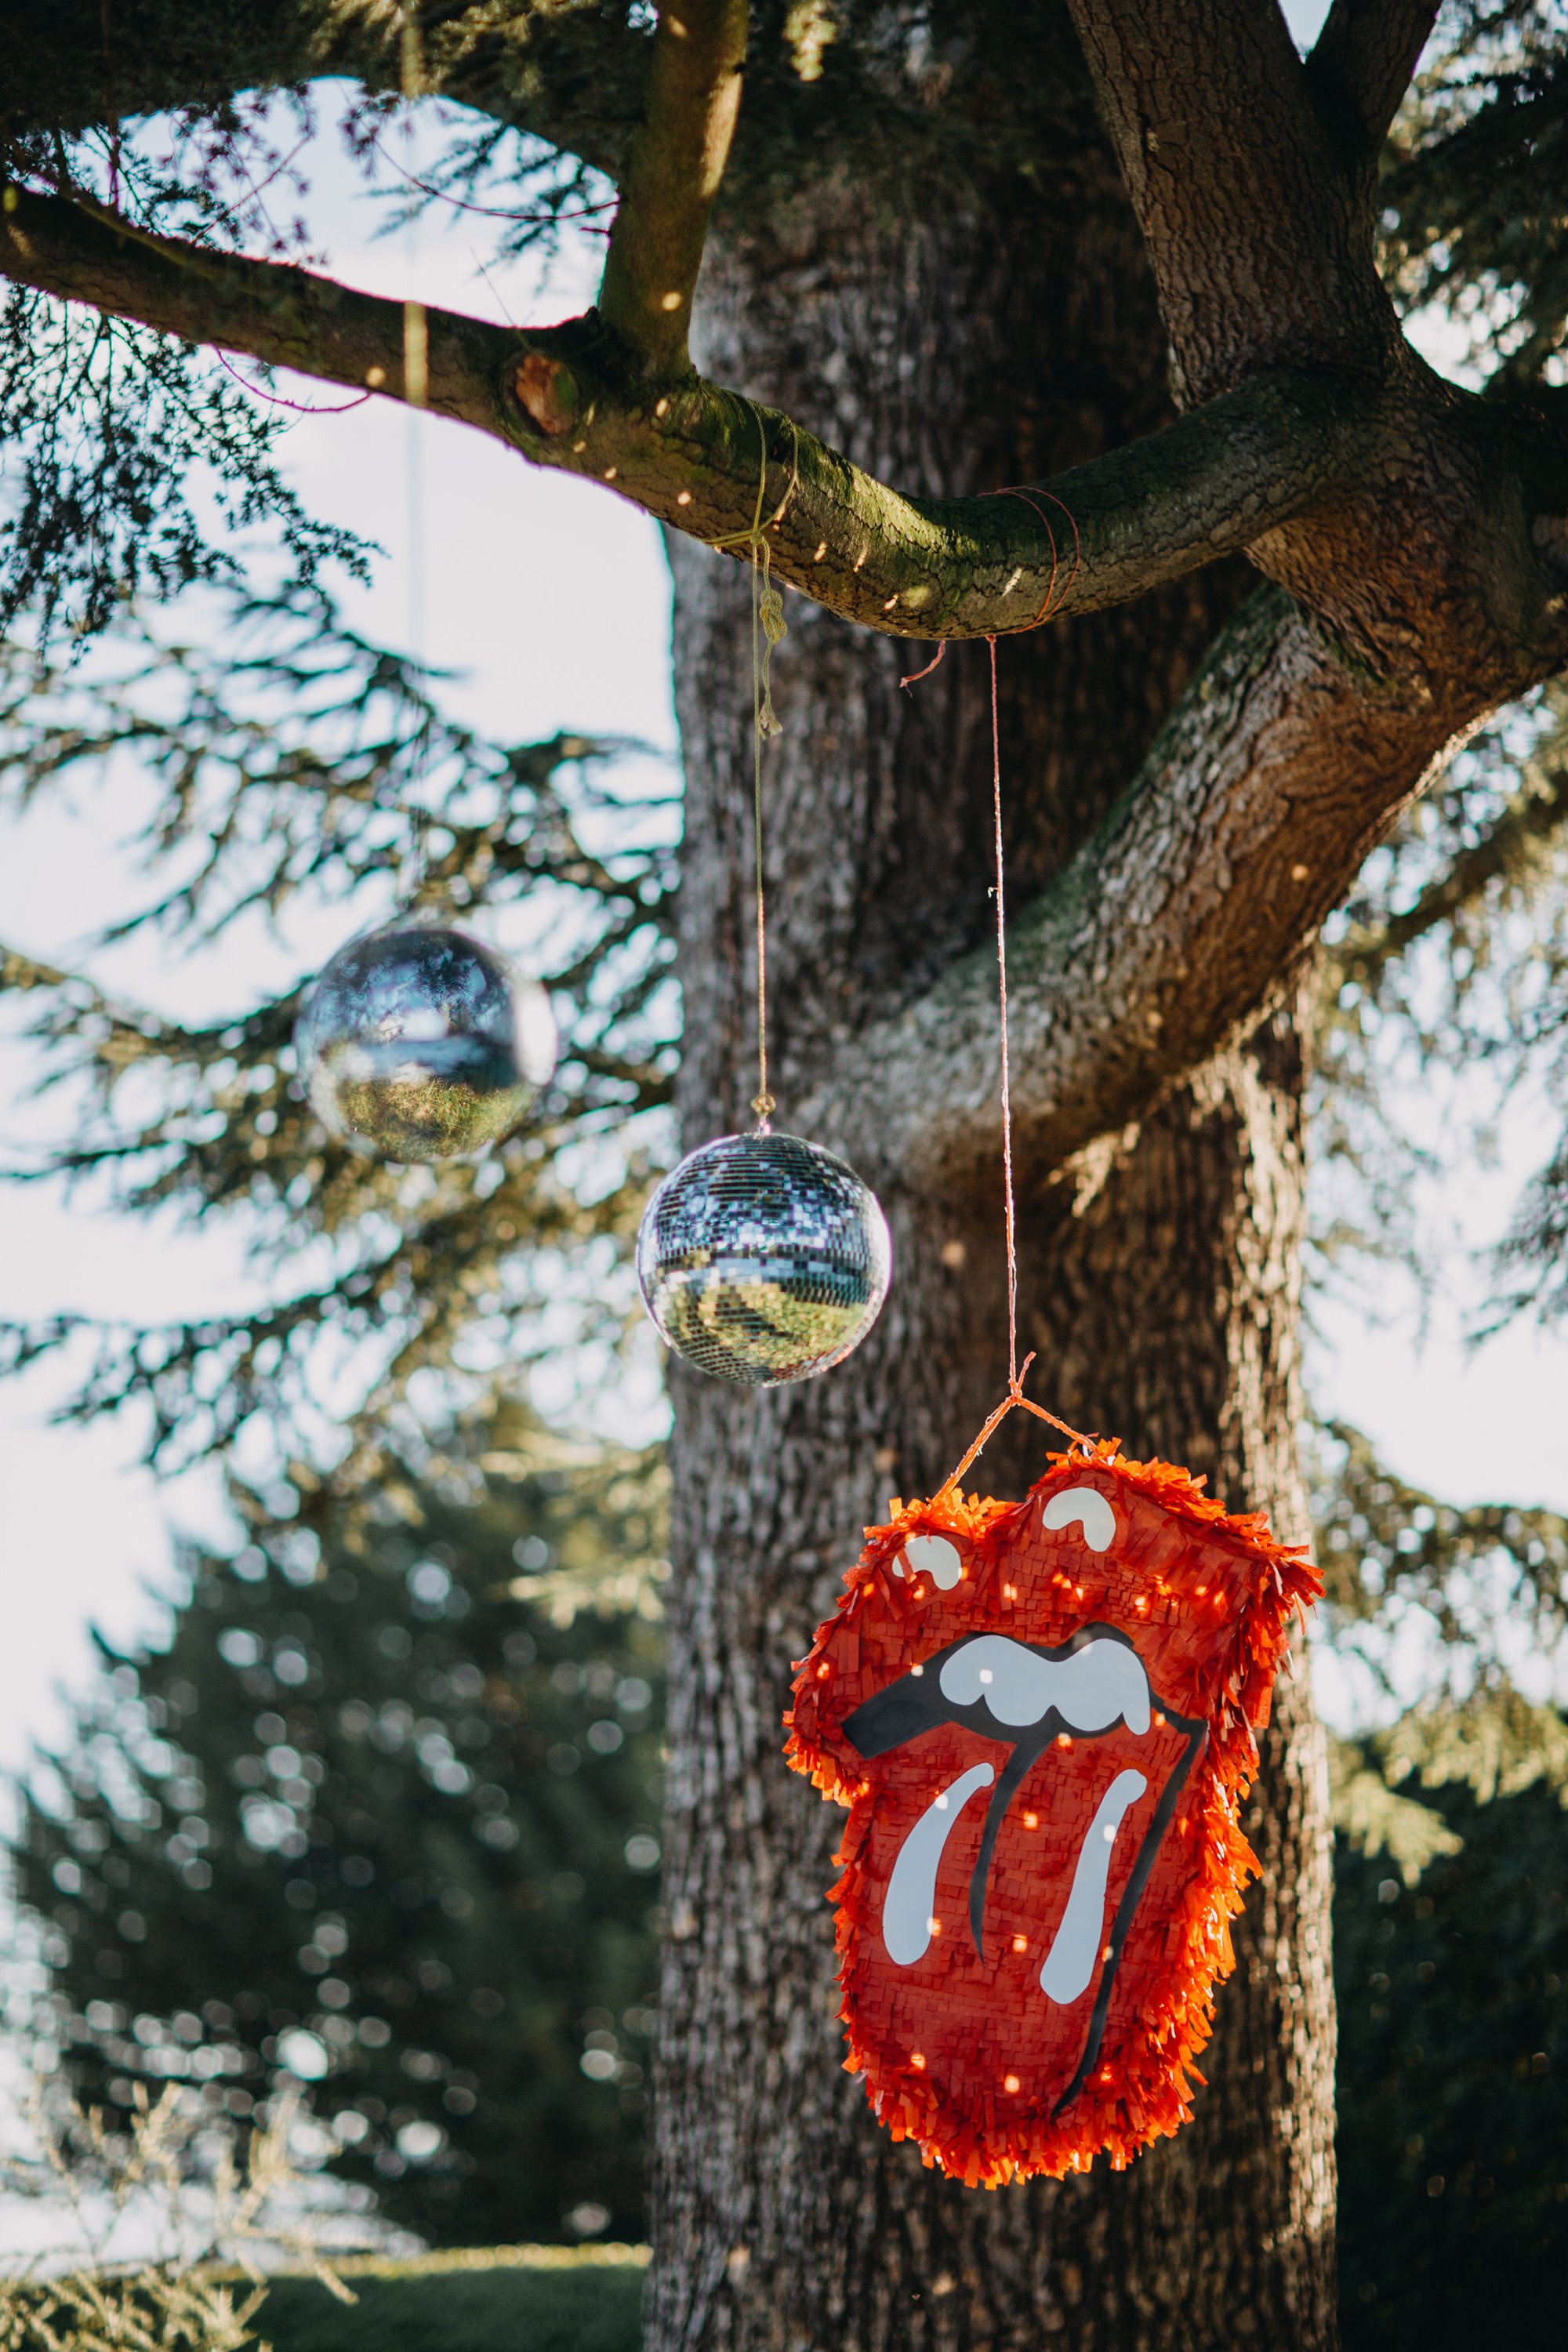 Cool rock n roll style wedding with rolling stones pinata and disco ball hanging from tree in the cotswolds